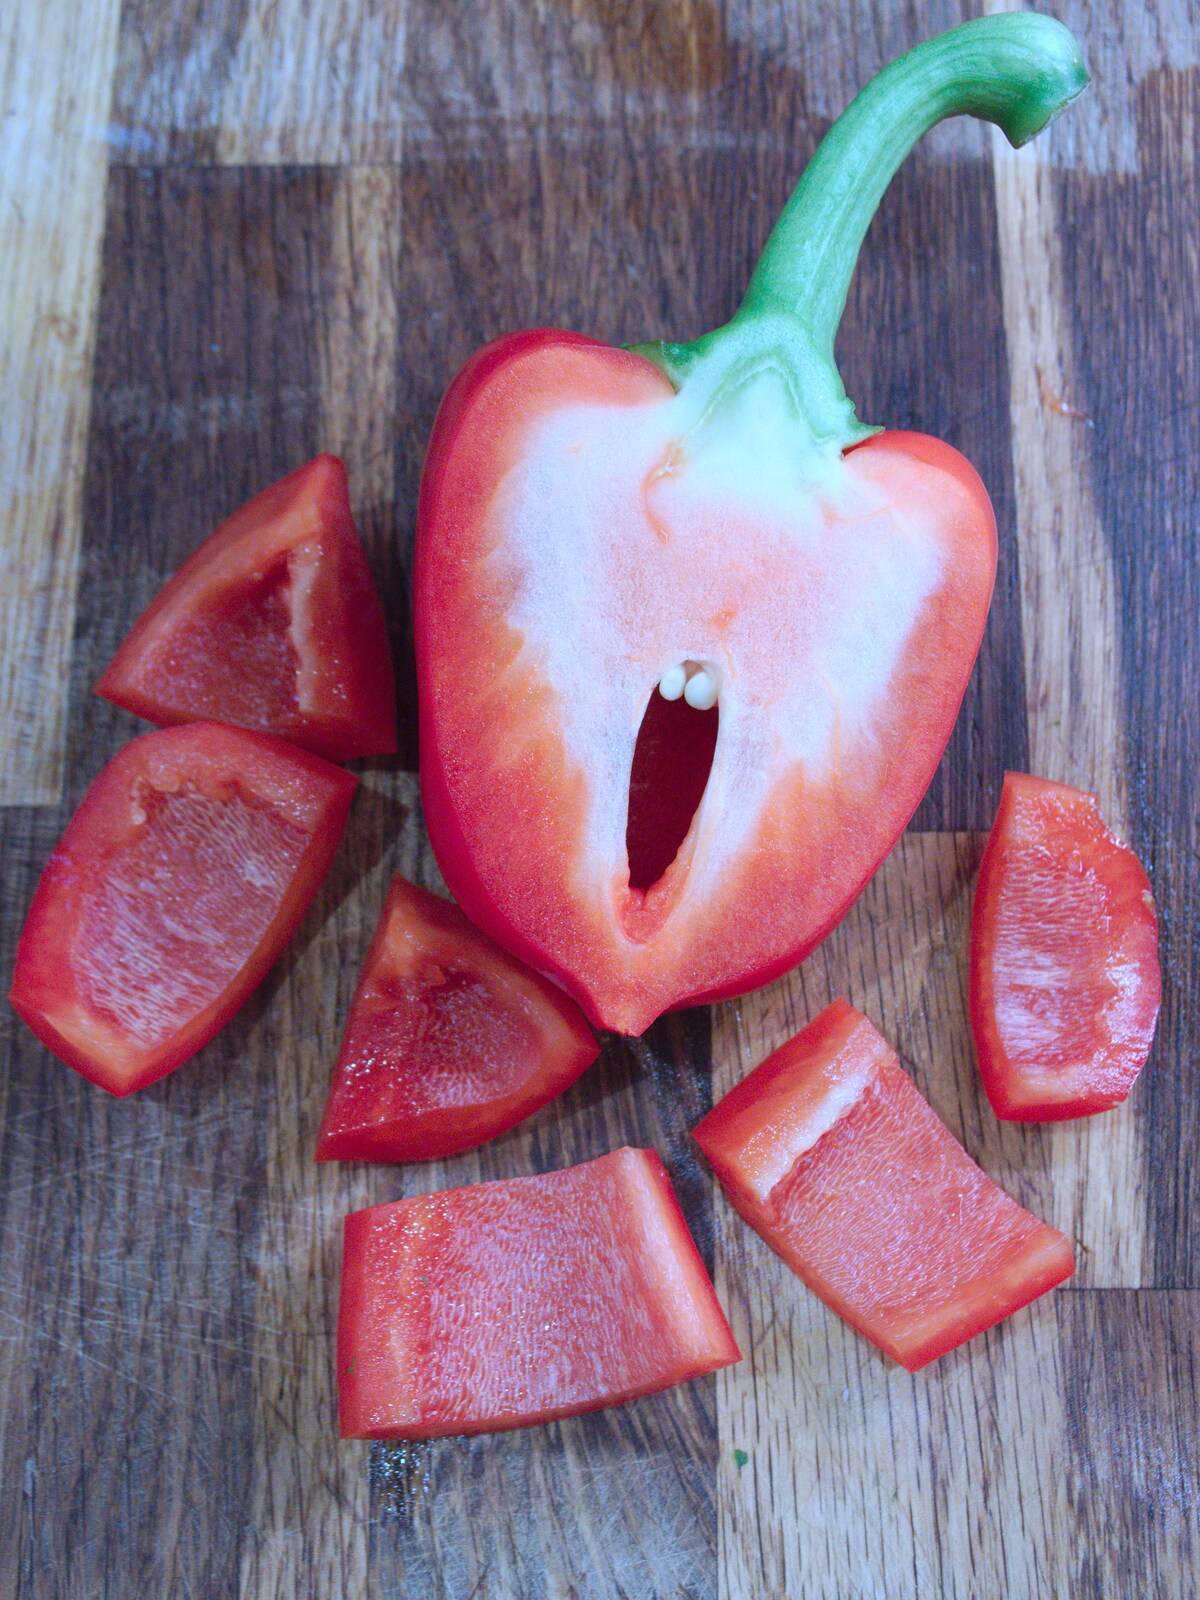 A cut pepper looks like it's screaming from A May Miscellany, London - 8th May 2014